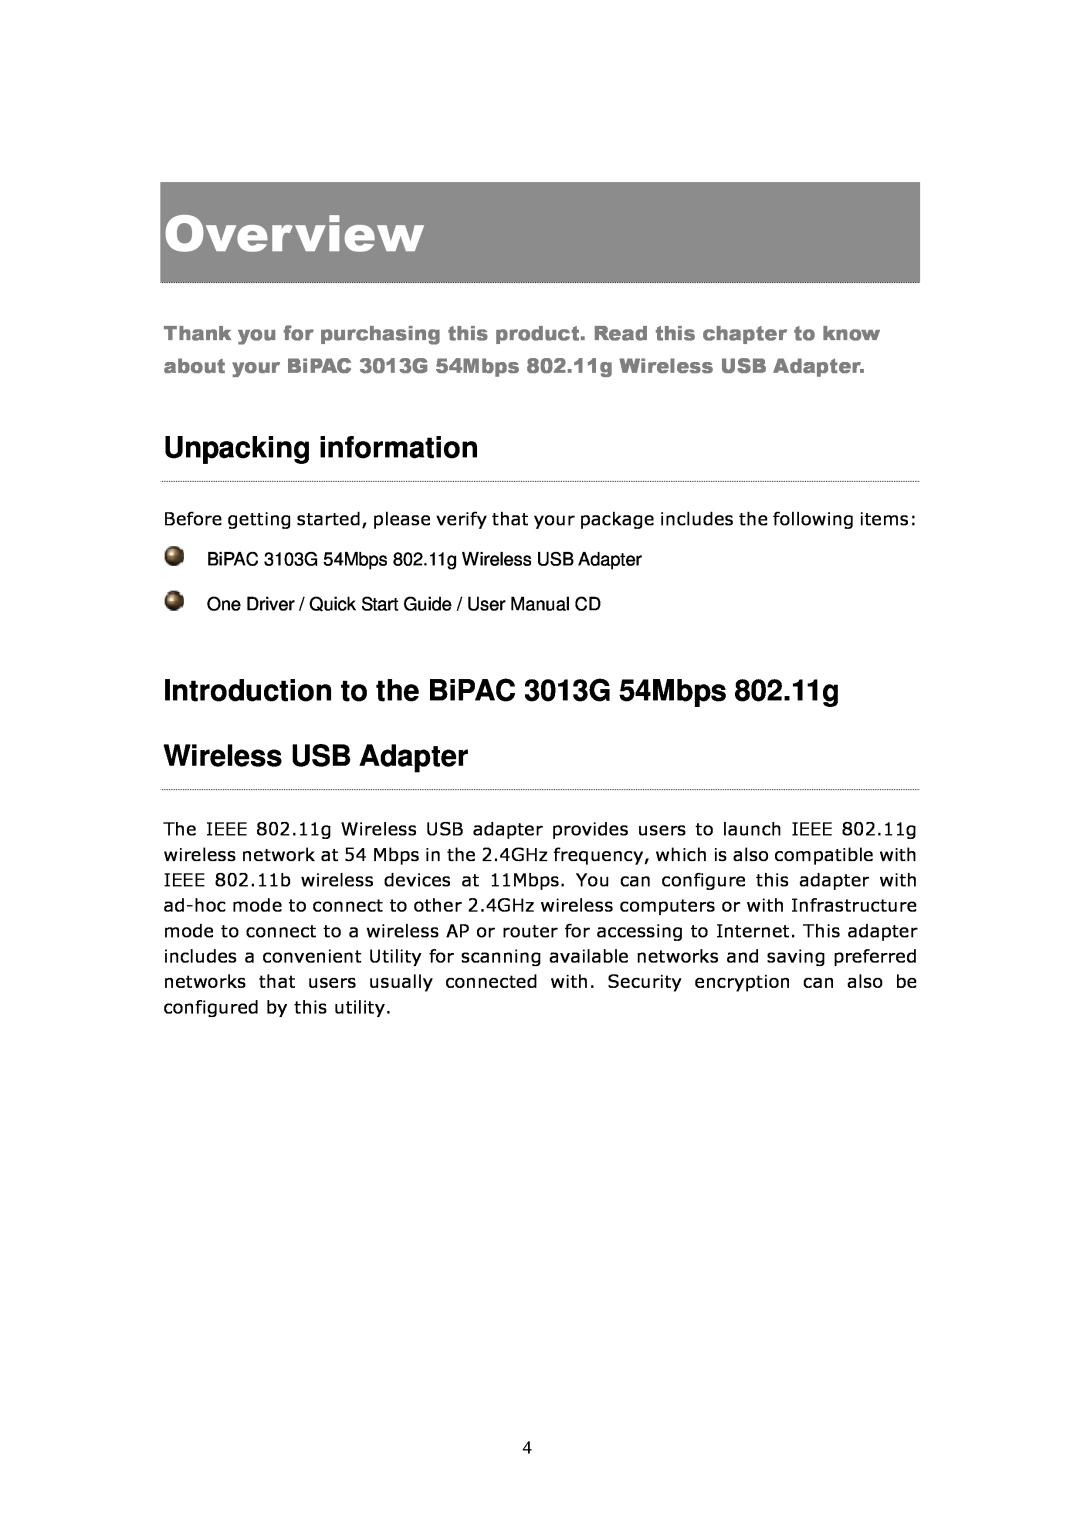 Billion Electric Company Overview, Unpacking information, about your BiPAC 3013G 54Mbps 802.11g Wireless USB Adapter 